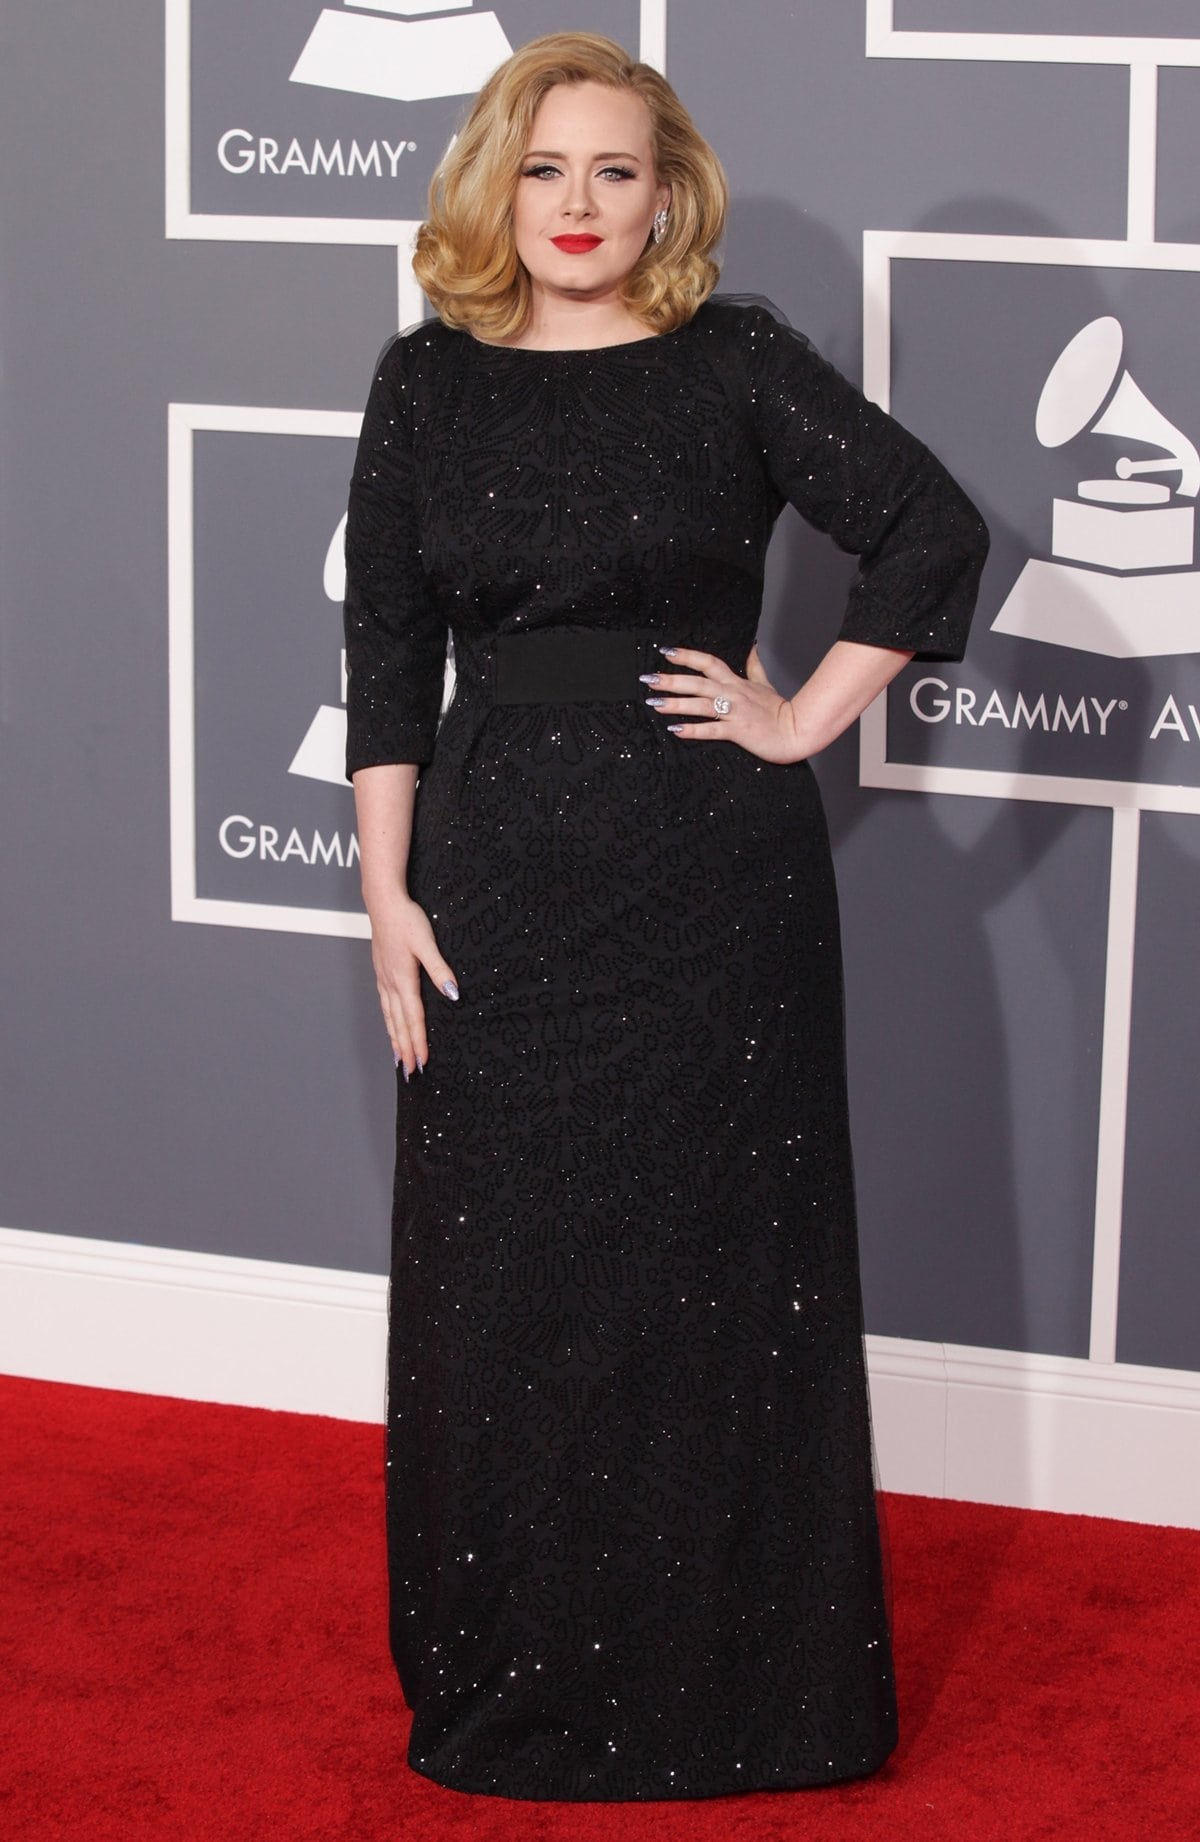 Singer Adele in a sparkling Giorgio Armani gown and De Beers earrings at the 54th Annual GRAMMY Awards